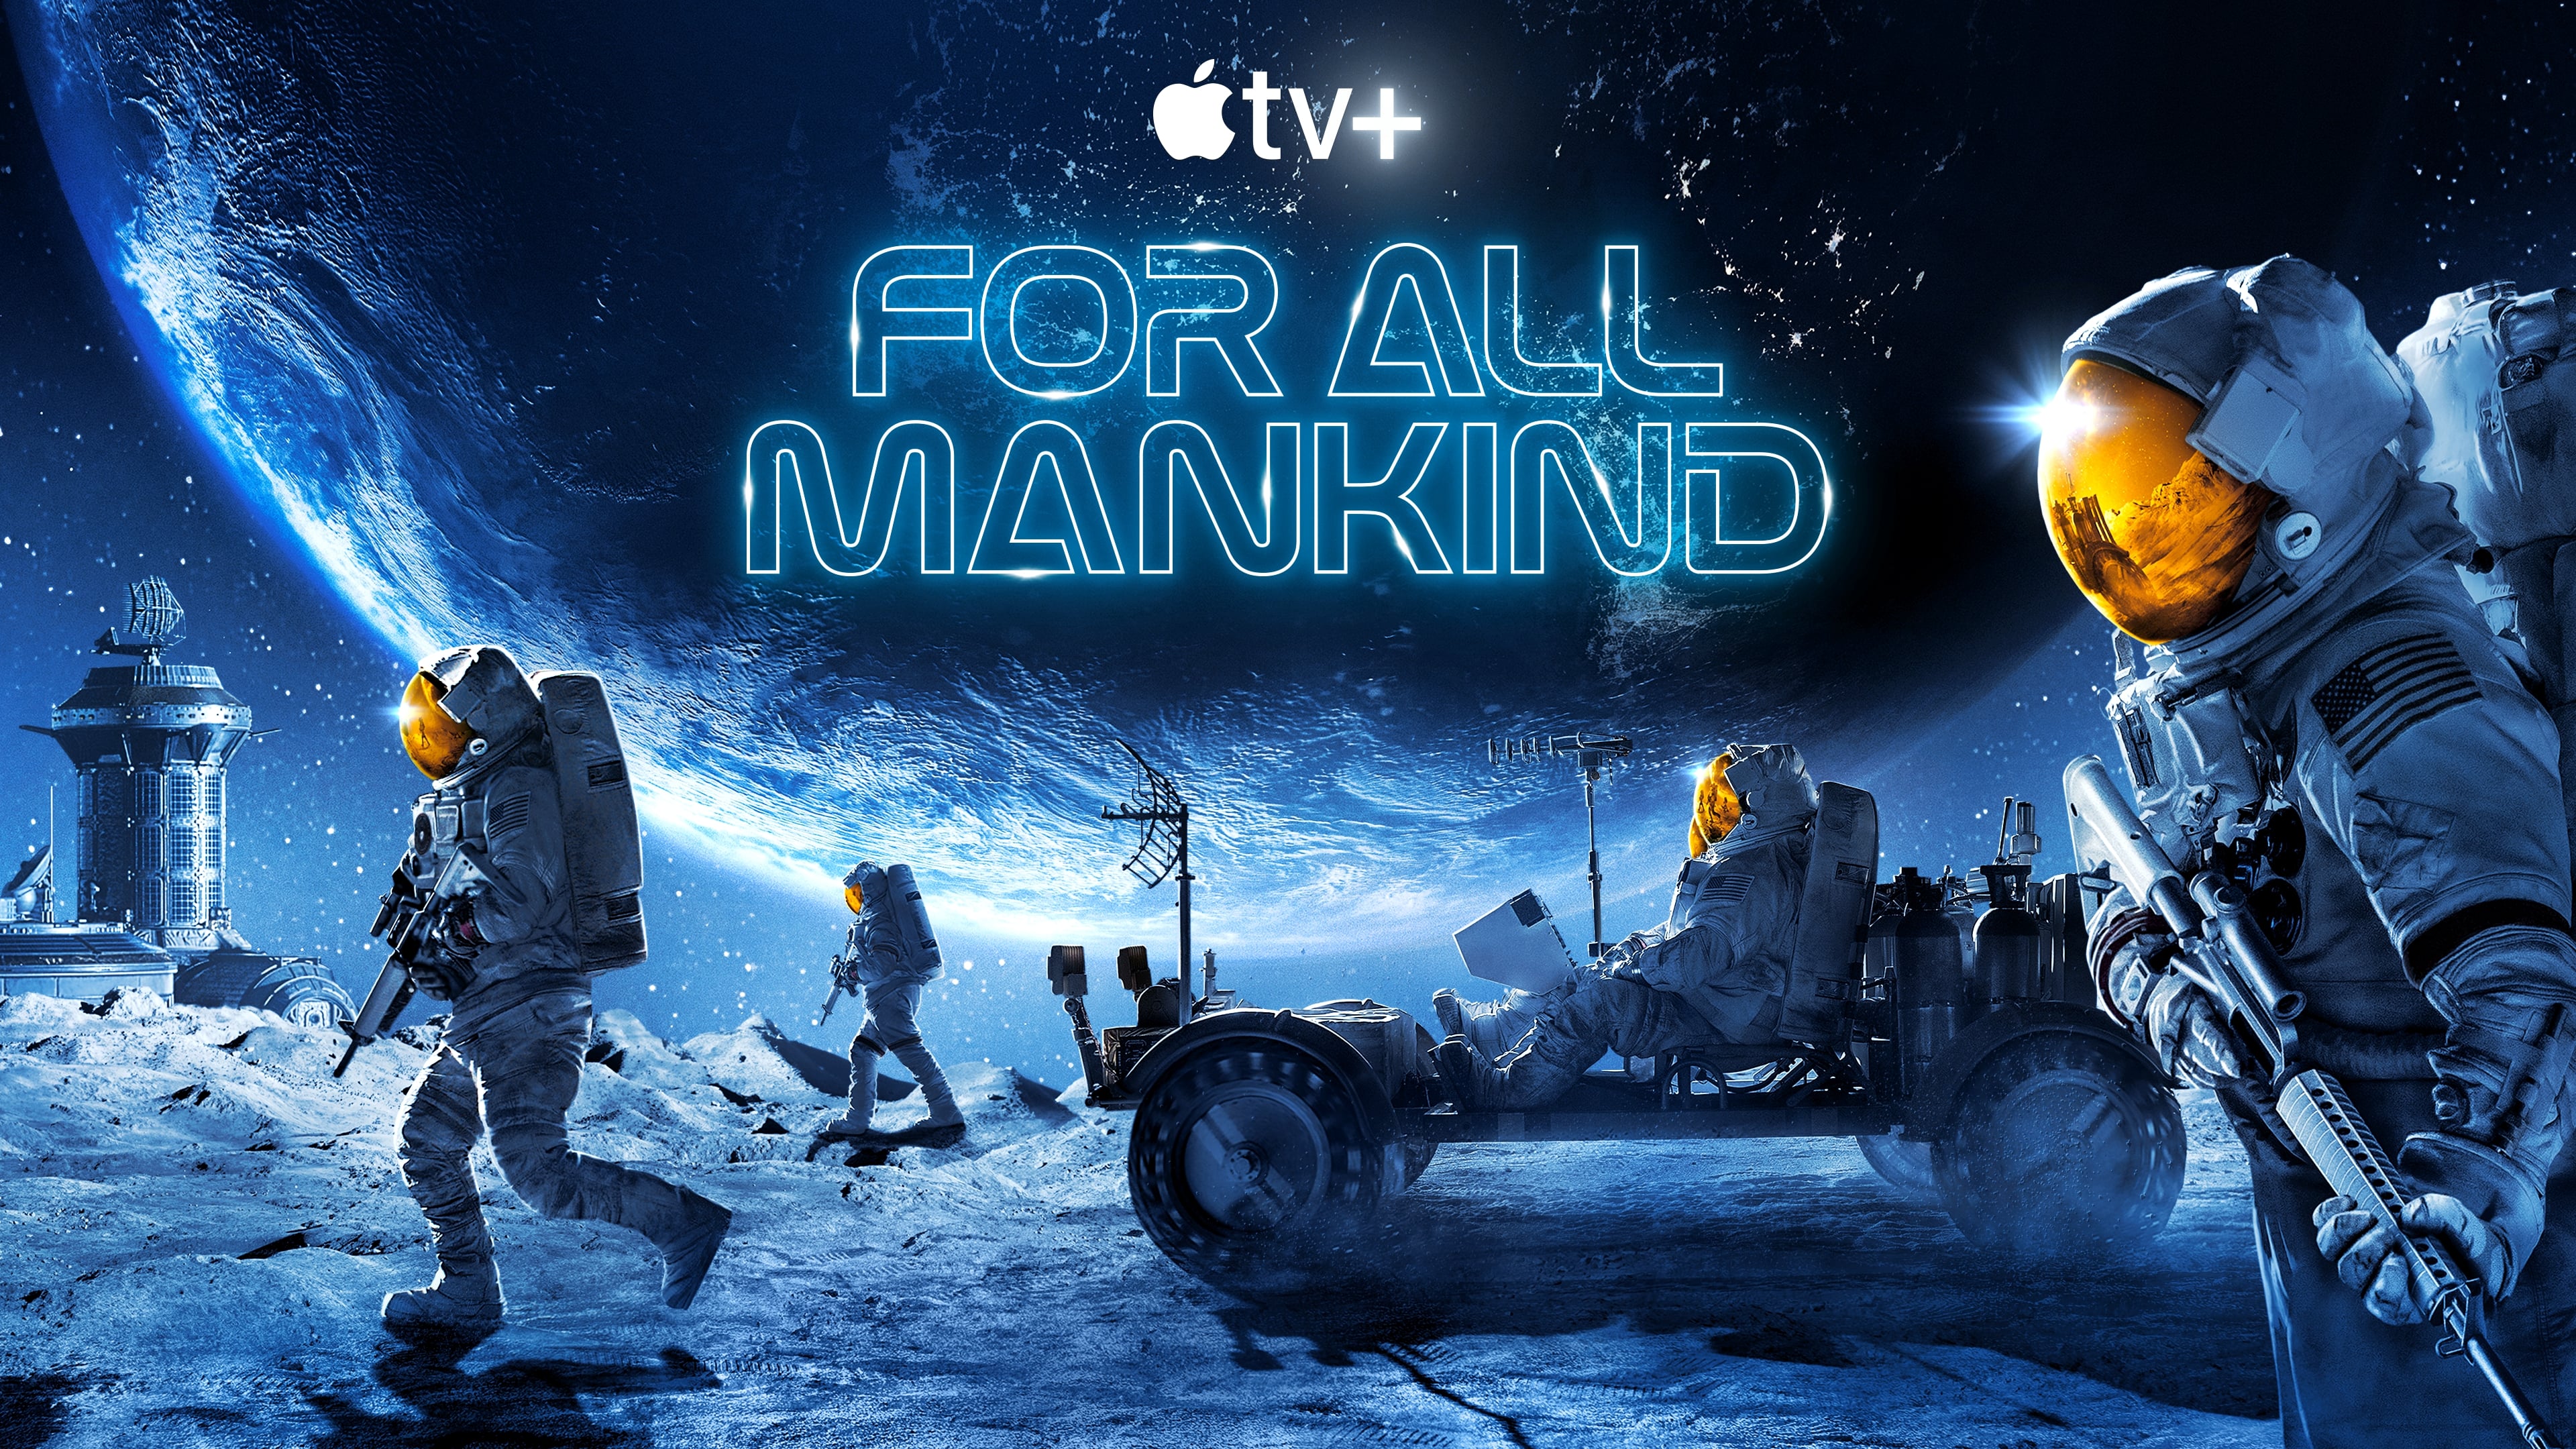 Meilleures séries Apple TV+ - For All Mankind